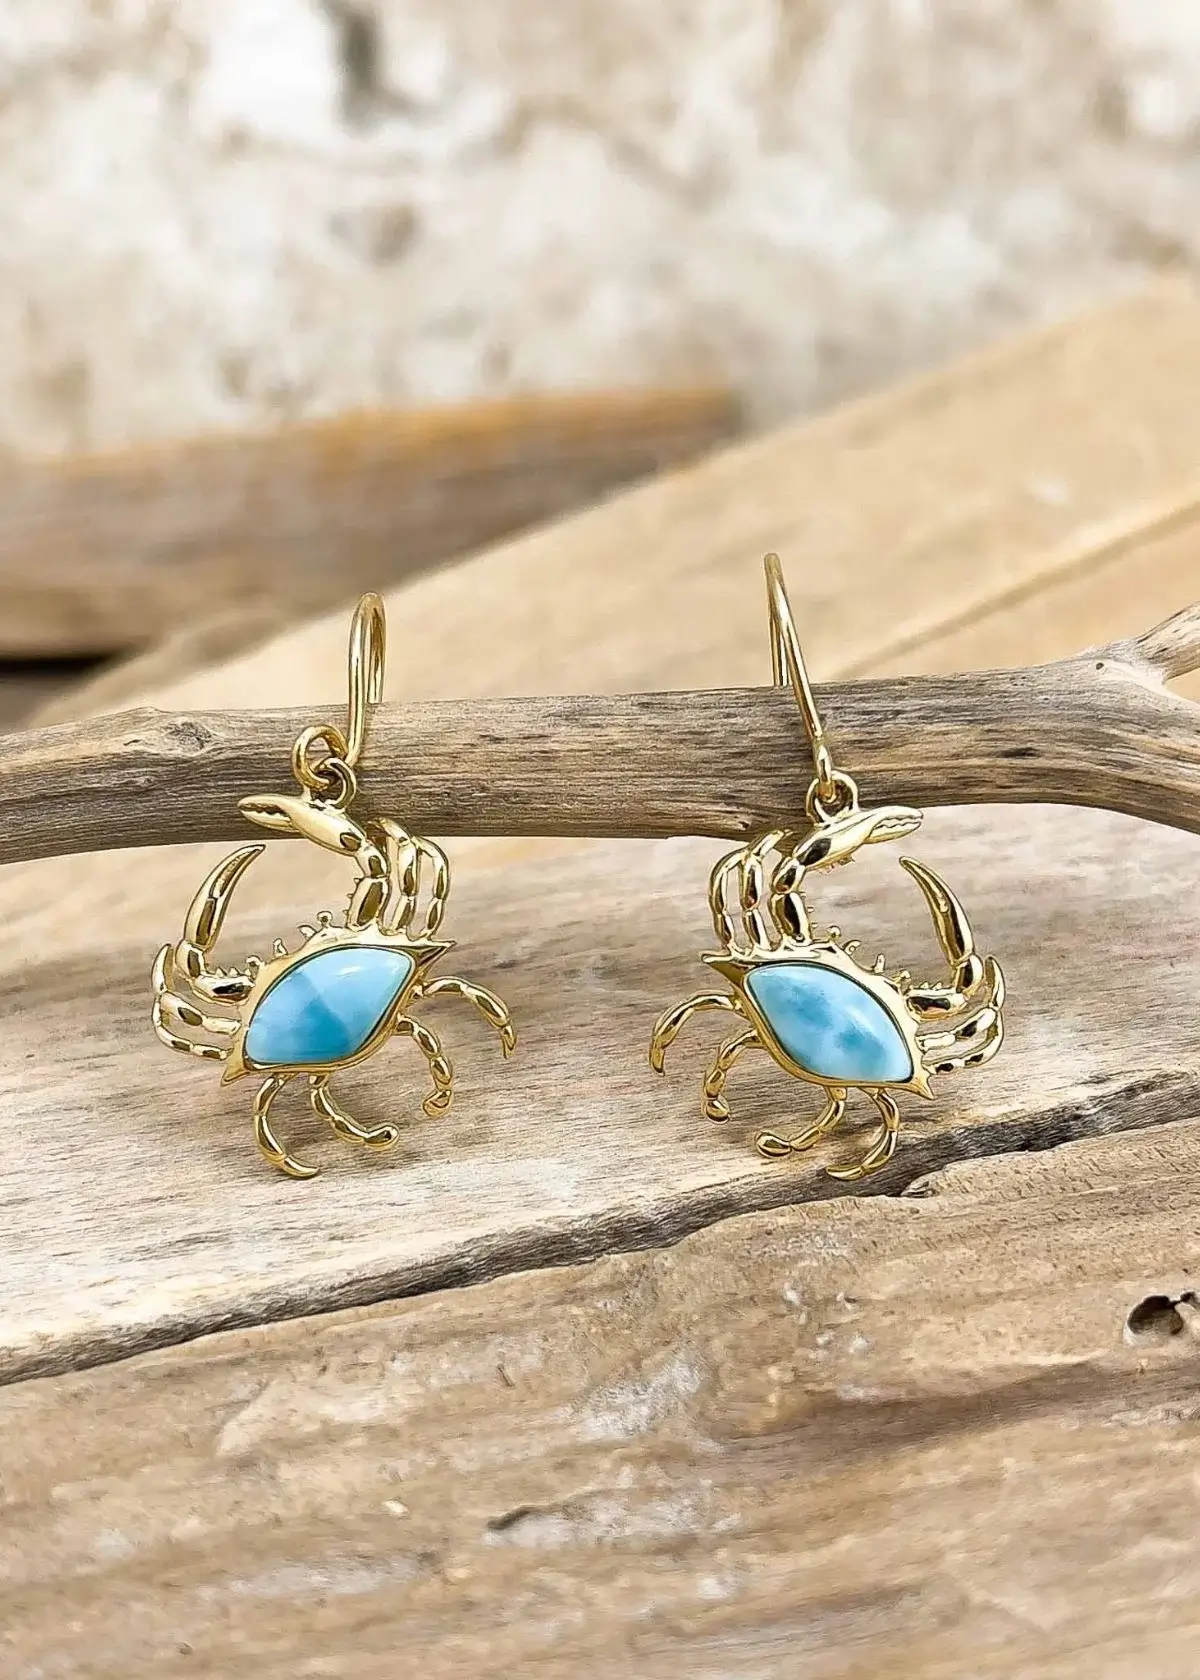 What materials are commonly used to make crab earrings?